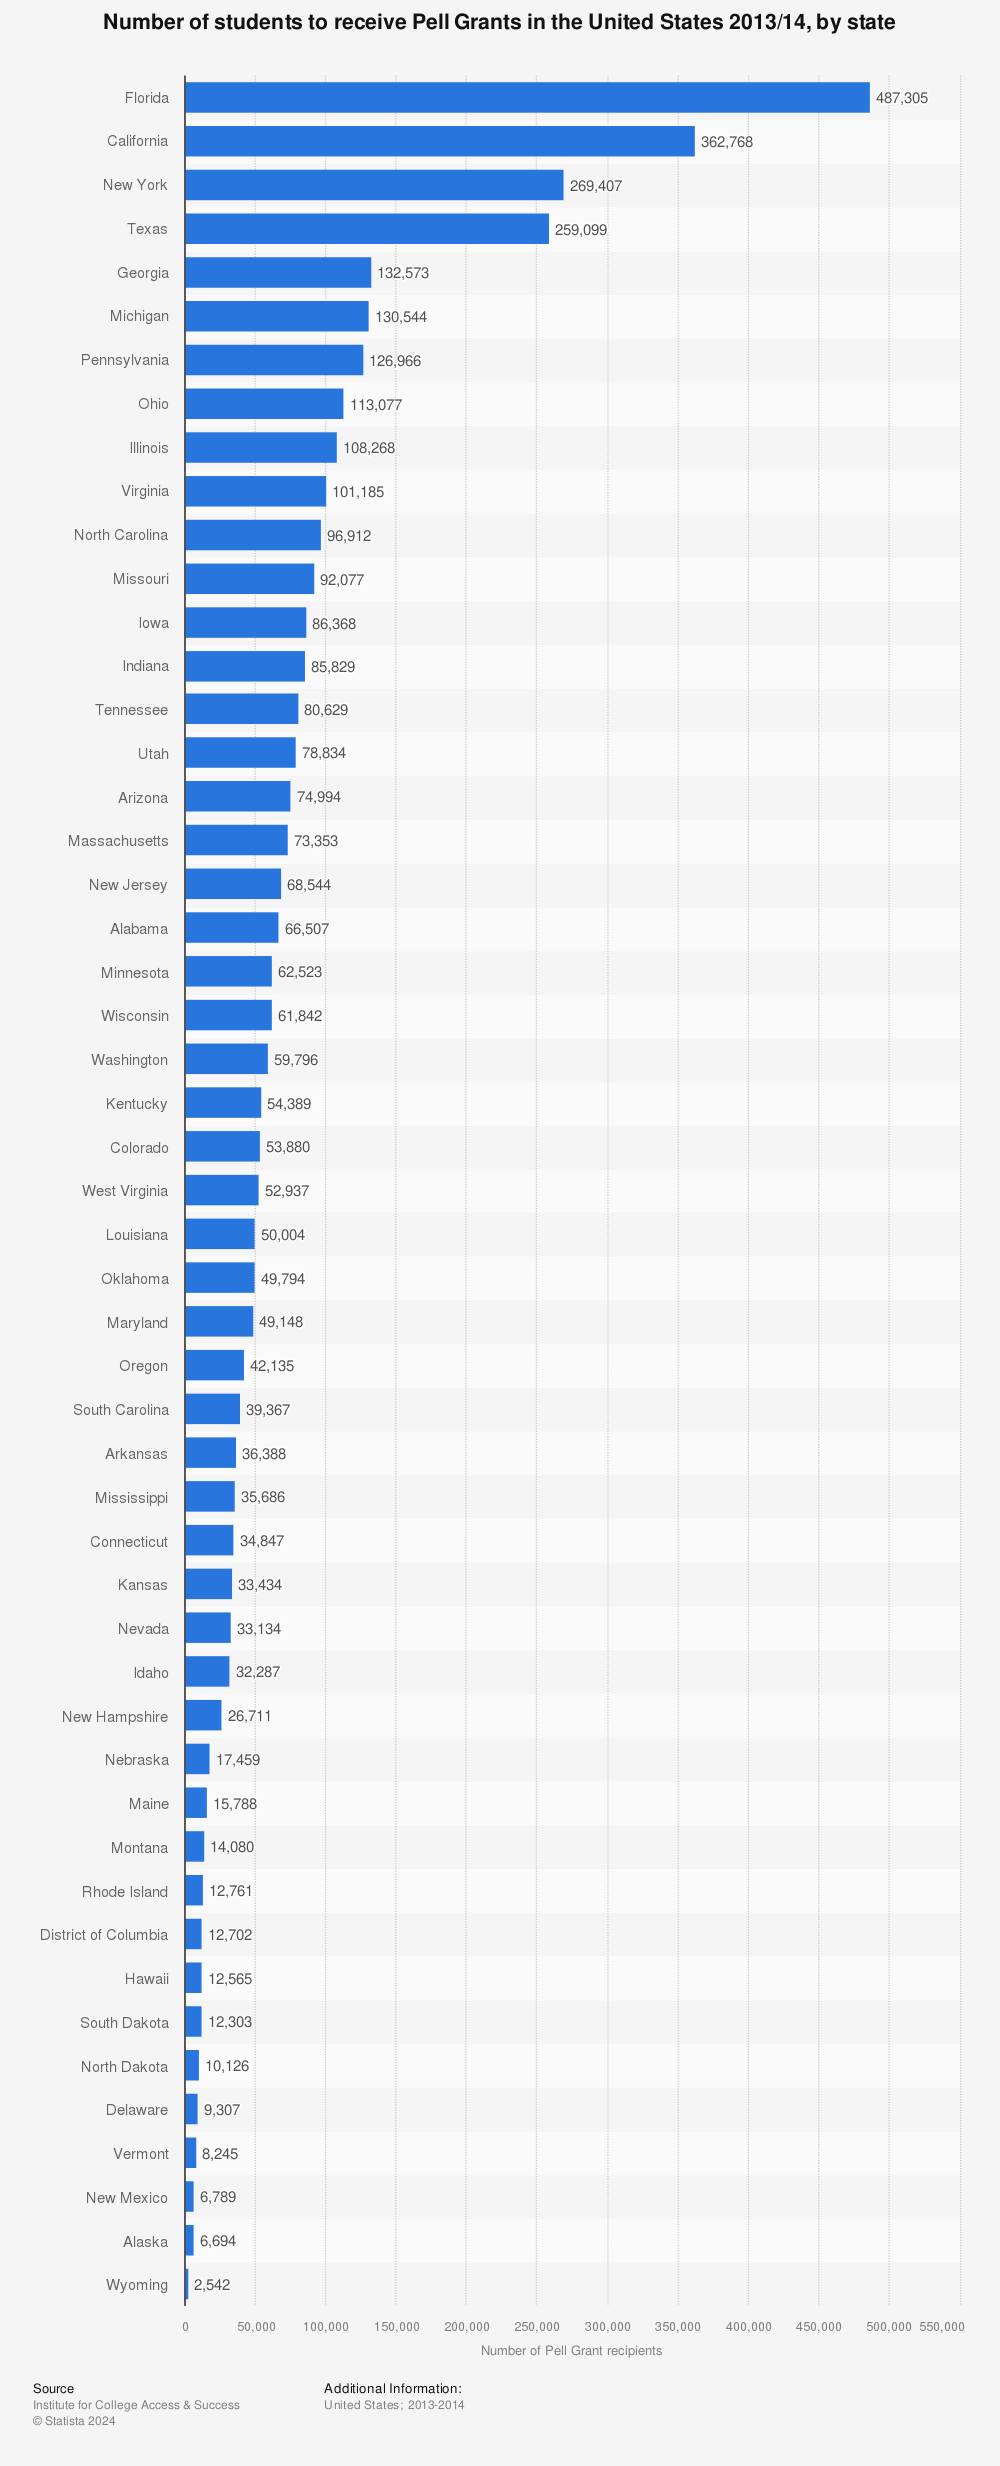 Statistic: Number of students to receive Pell Grants in the United States 2013/14, by state | Statista